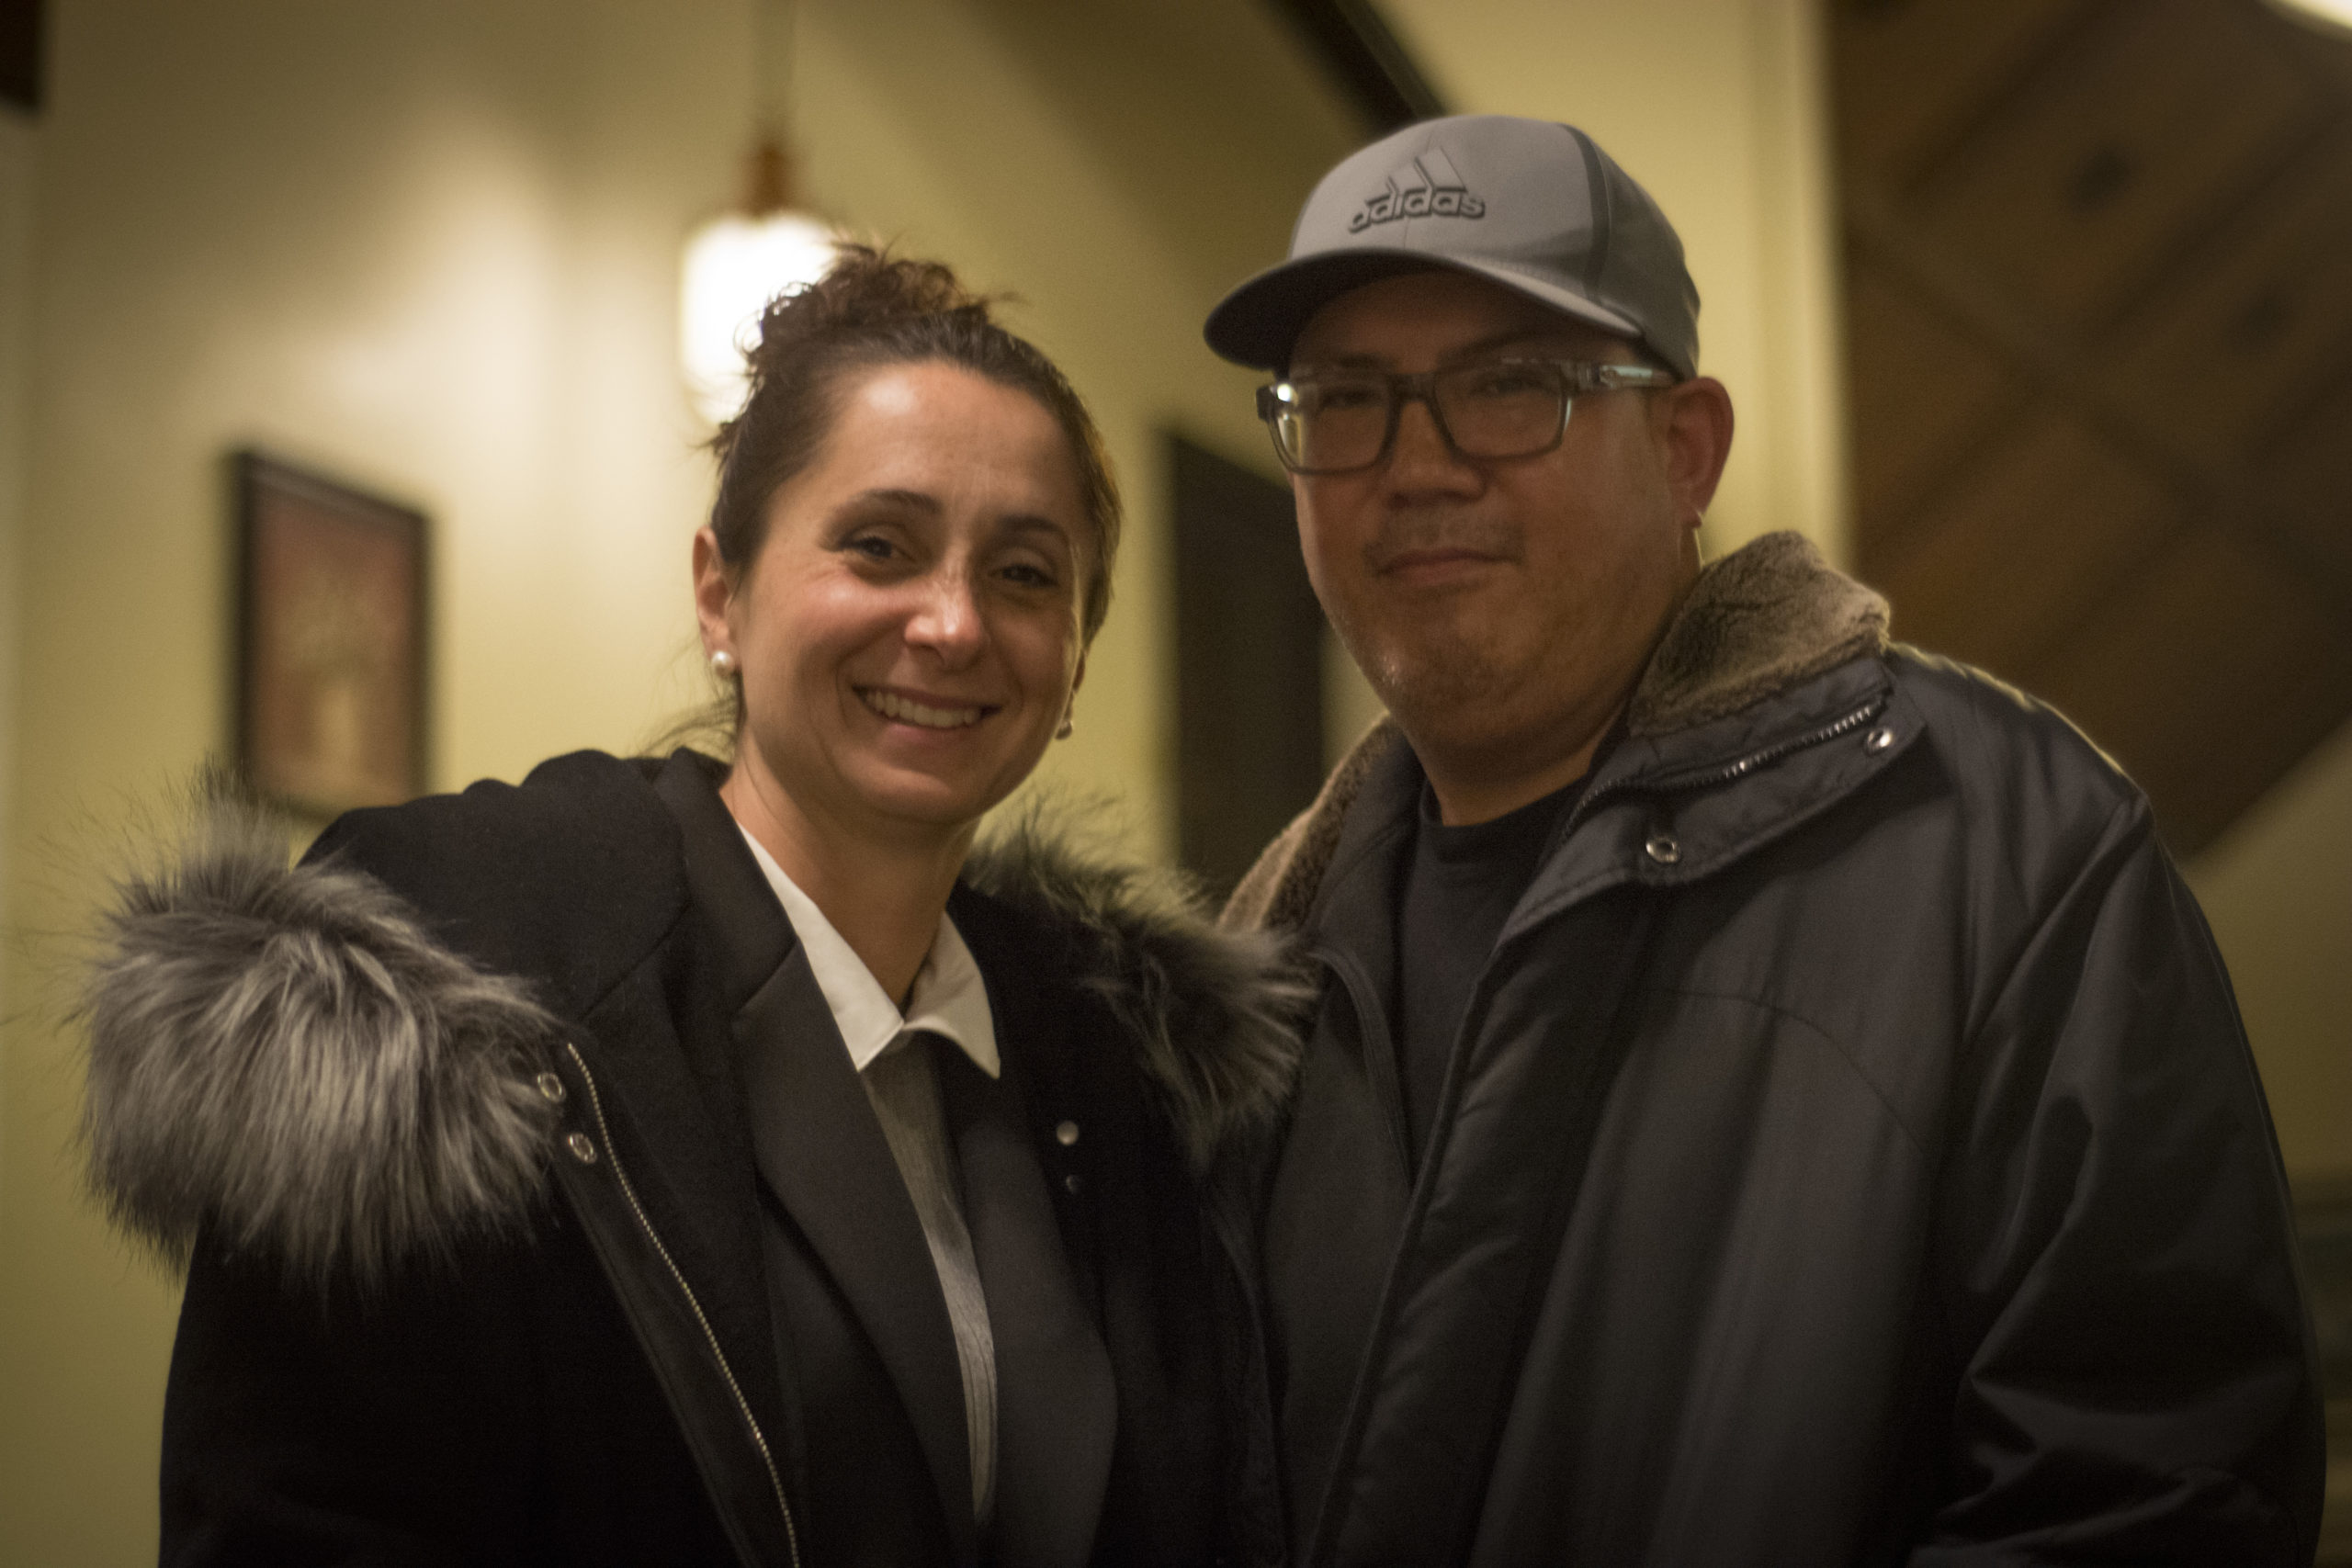 Tina Stellato and her husband Rob Villegas stayed at Great Neck House past midnight to hear the final results and shake hands with supporters. Stellato won 700 - 490. (Photo by Janelle Clausen)